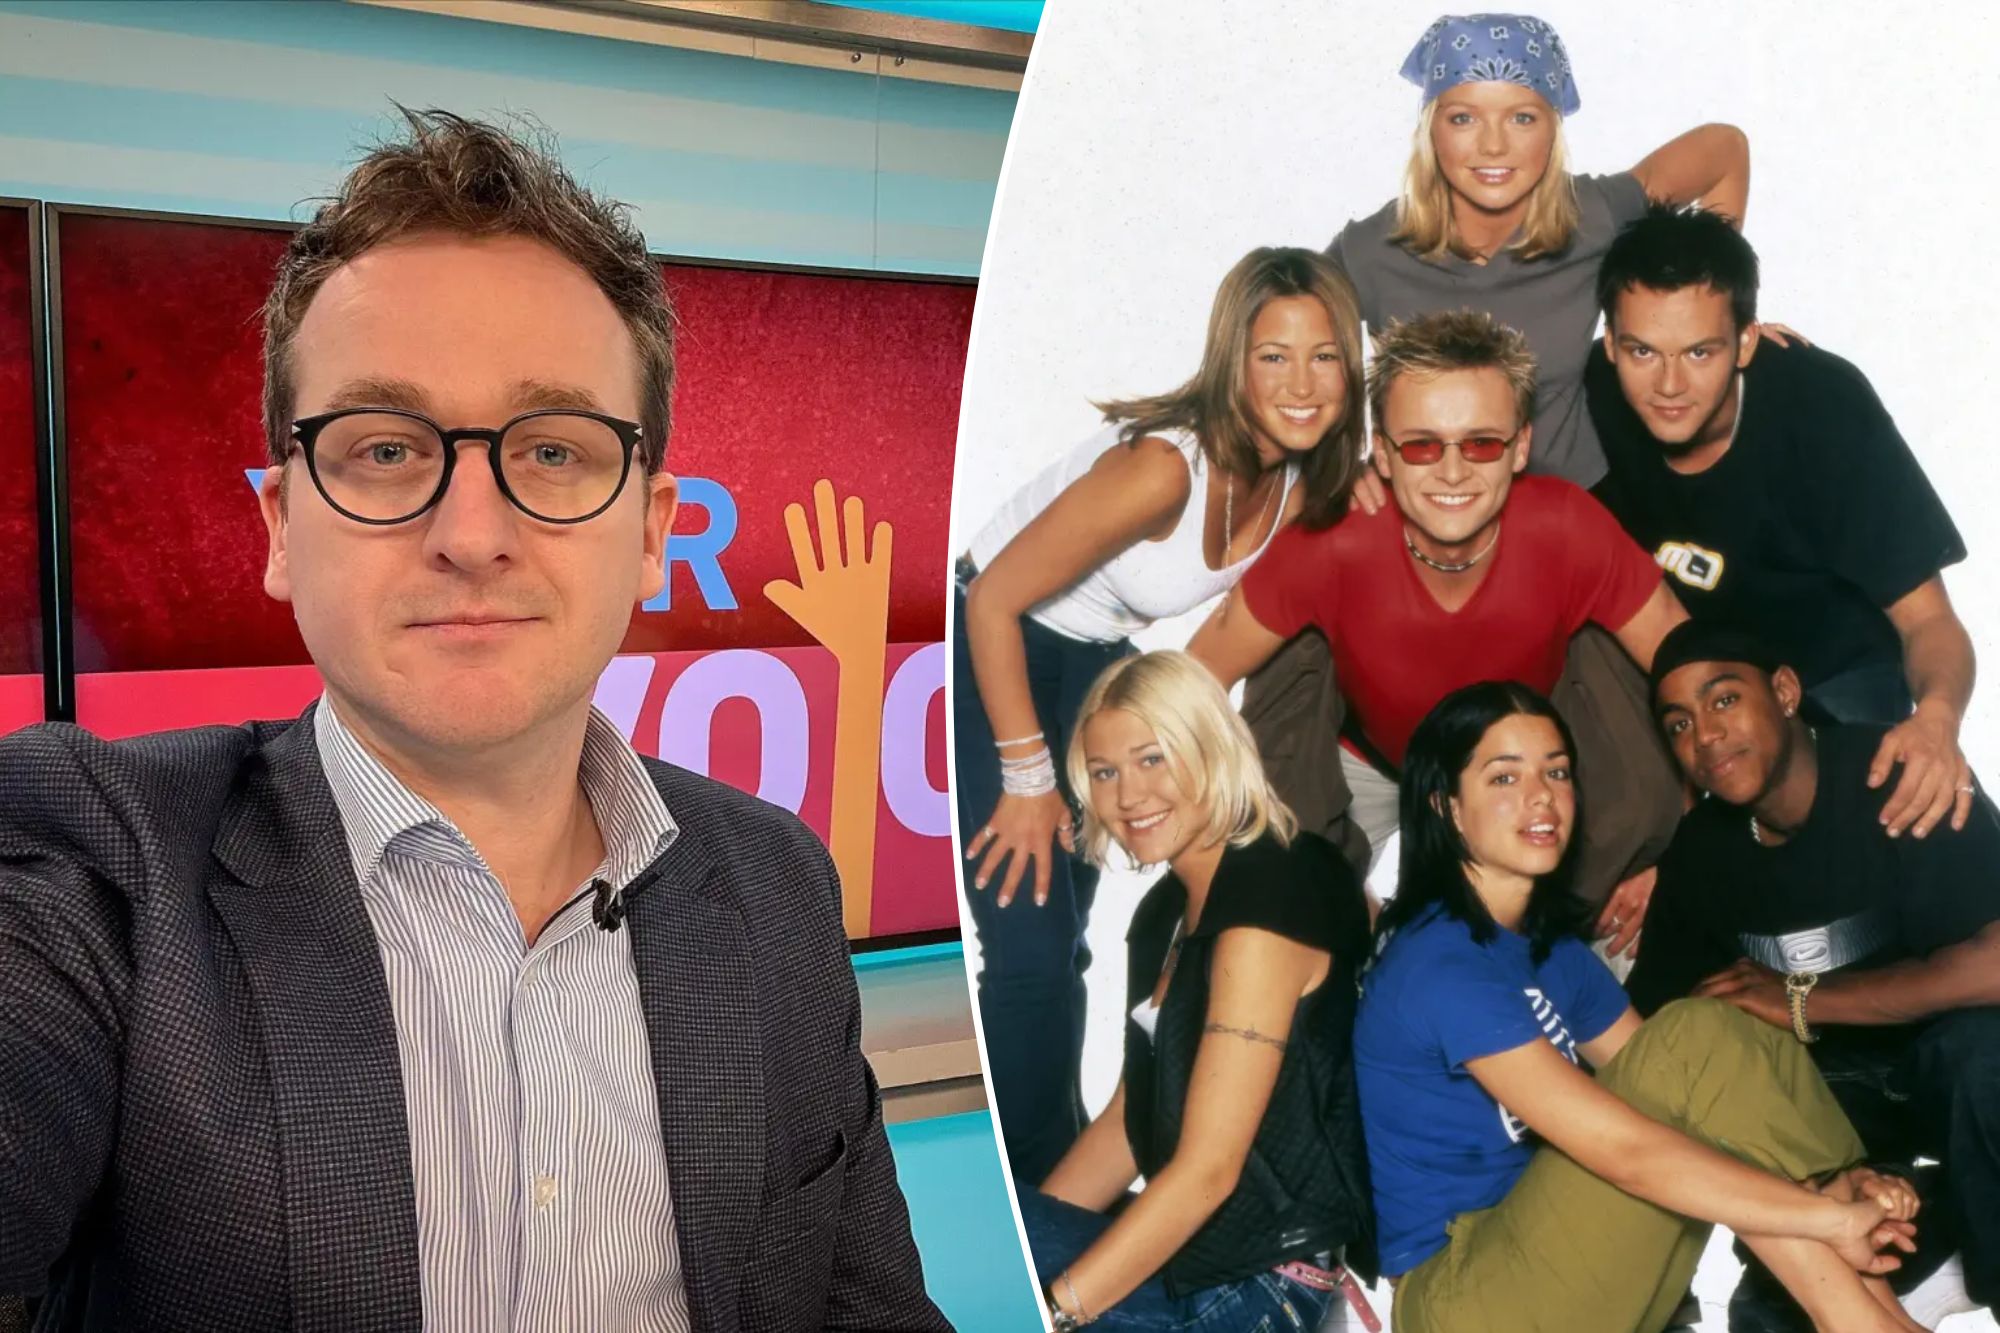 composite of shannon molloy and s club 7